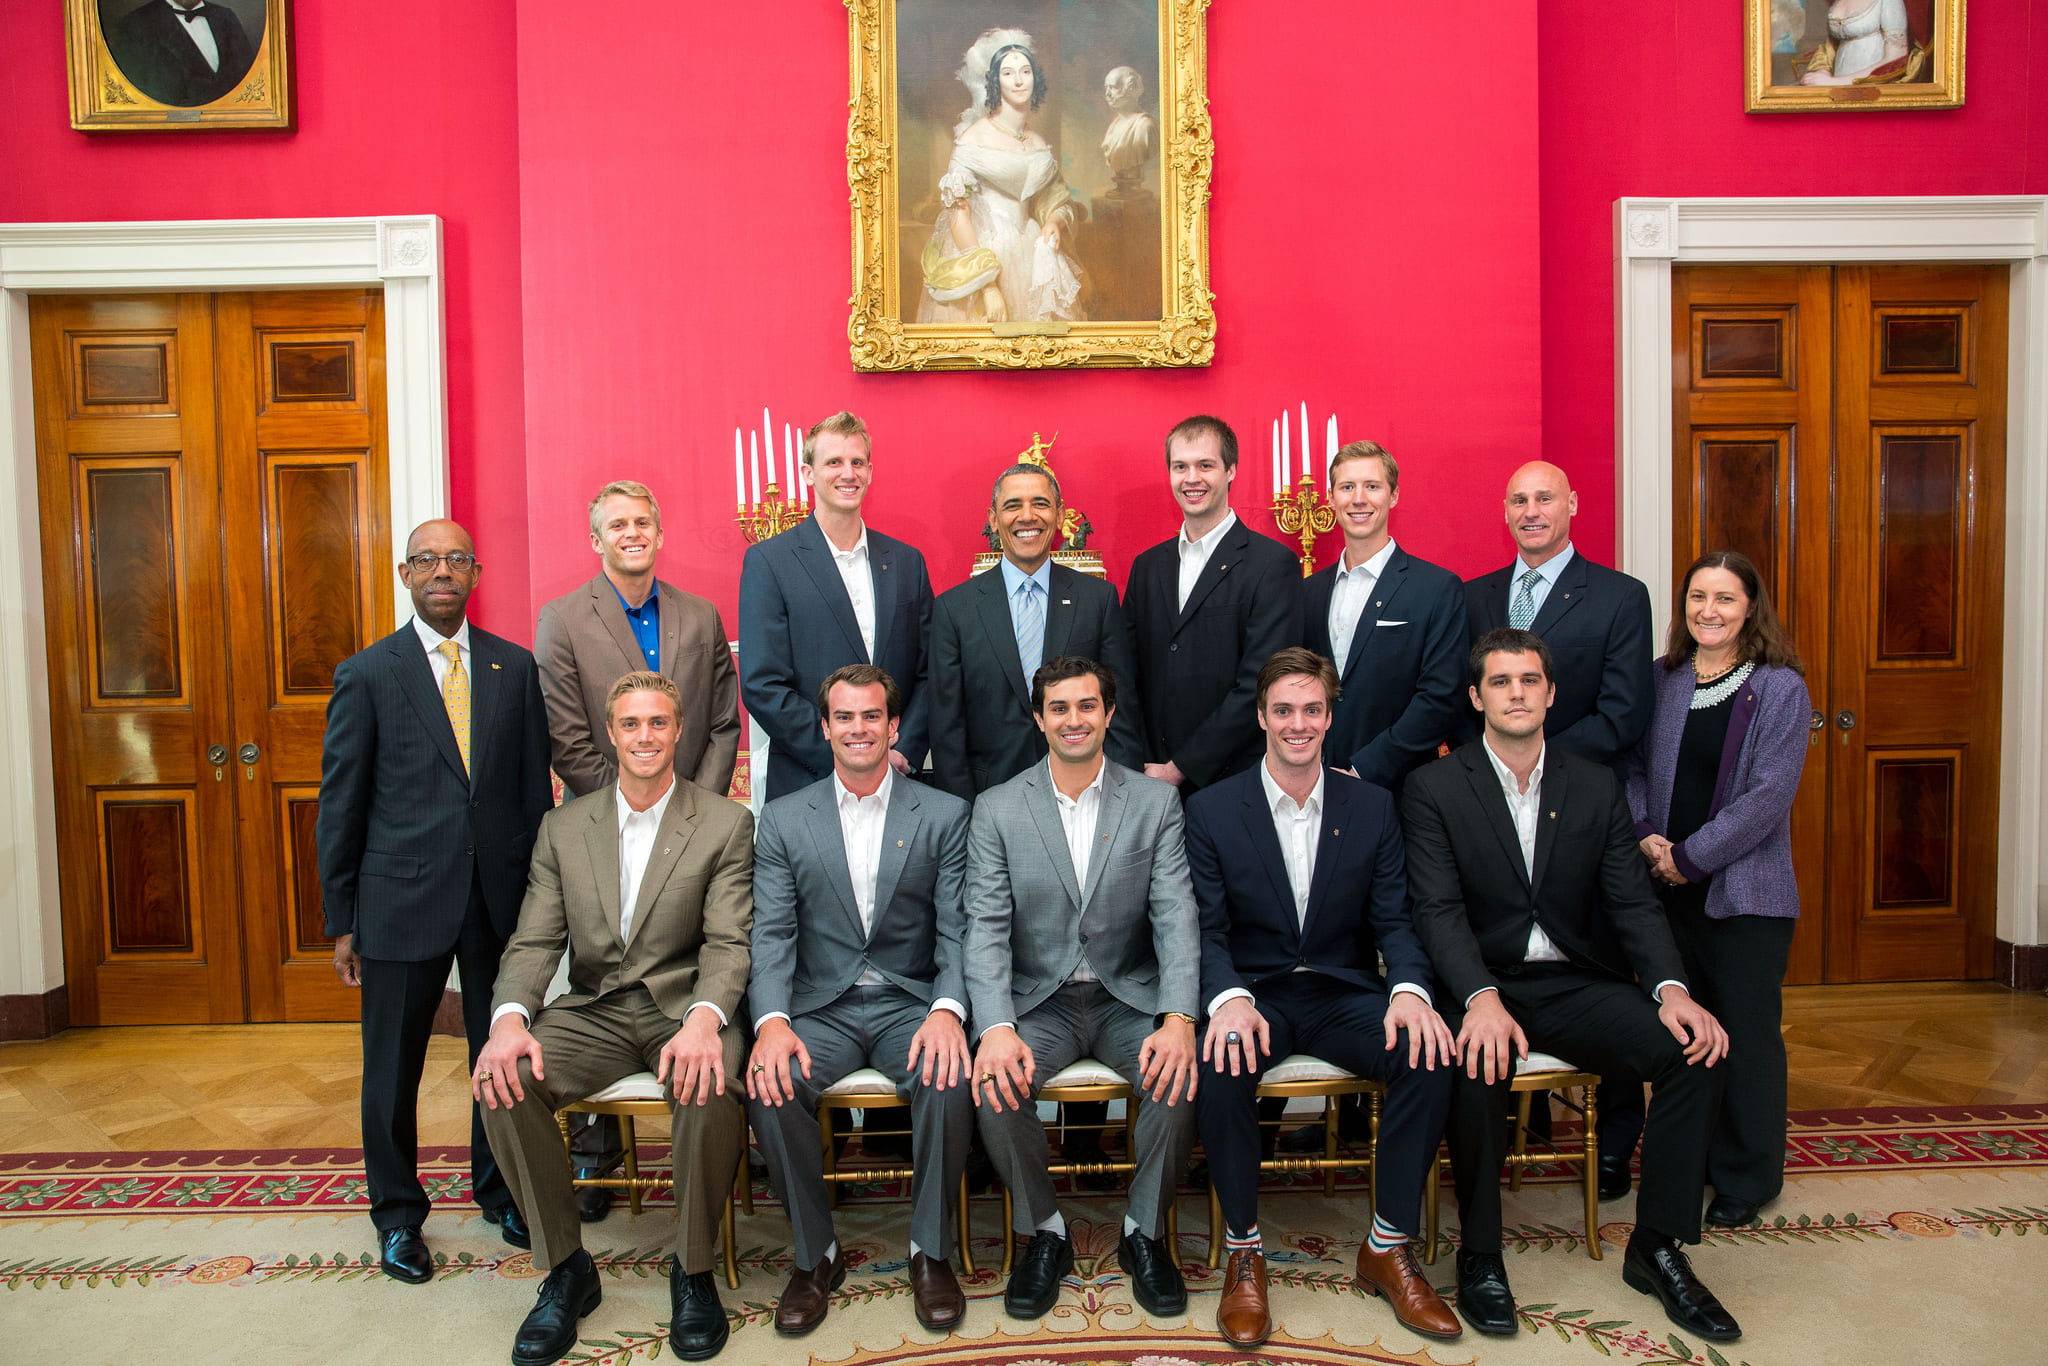 NCAA championship volleyball team with Obama